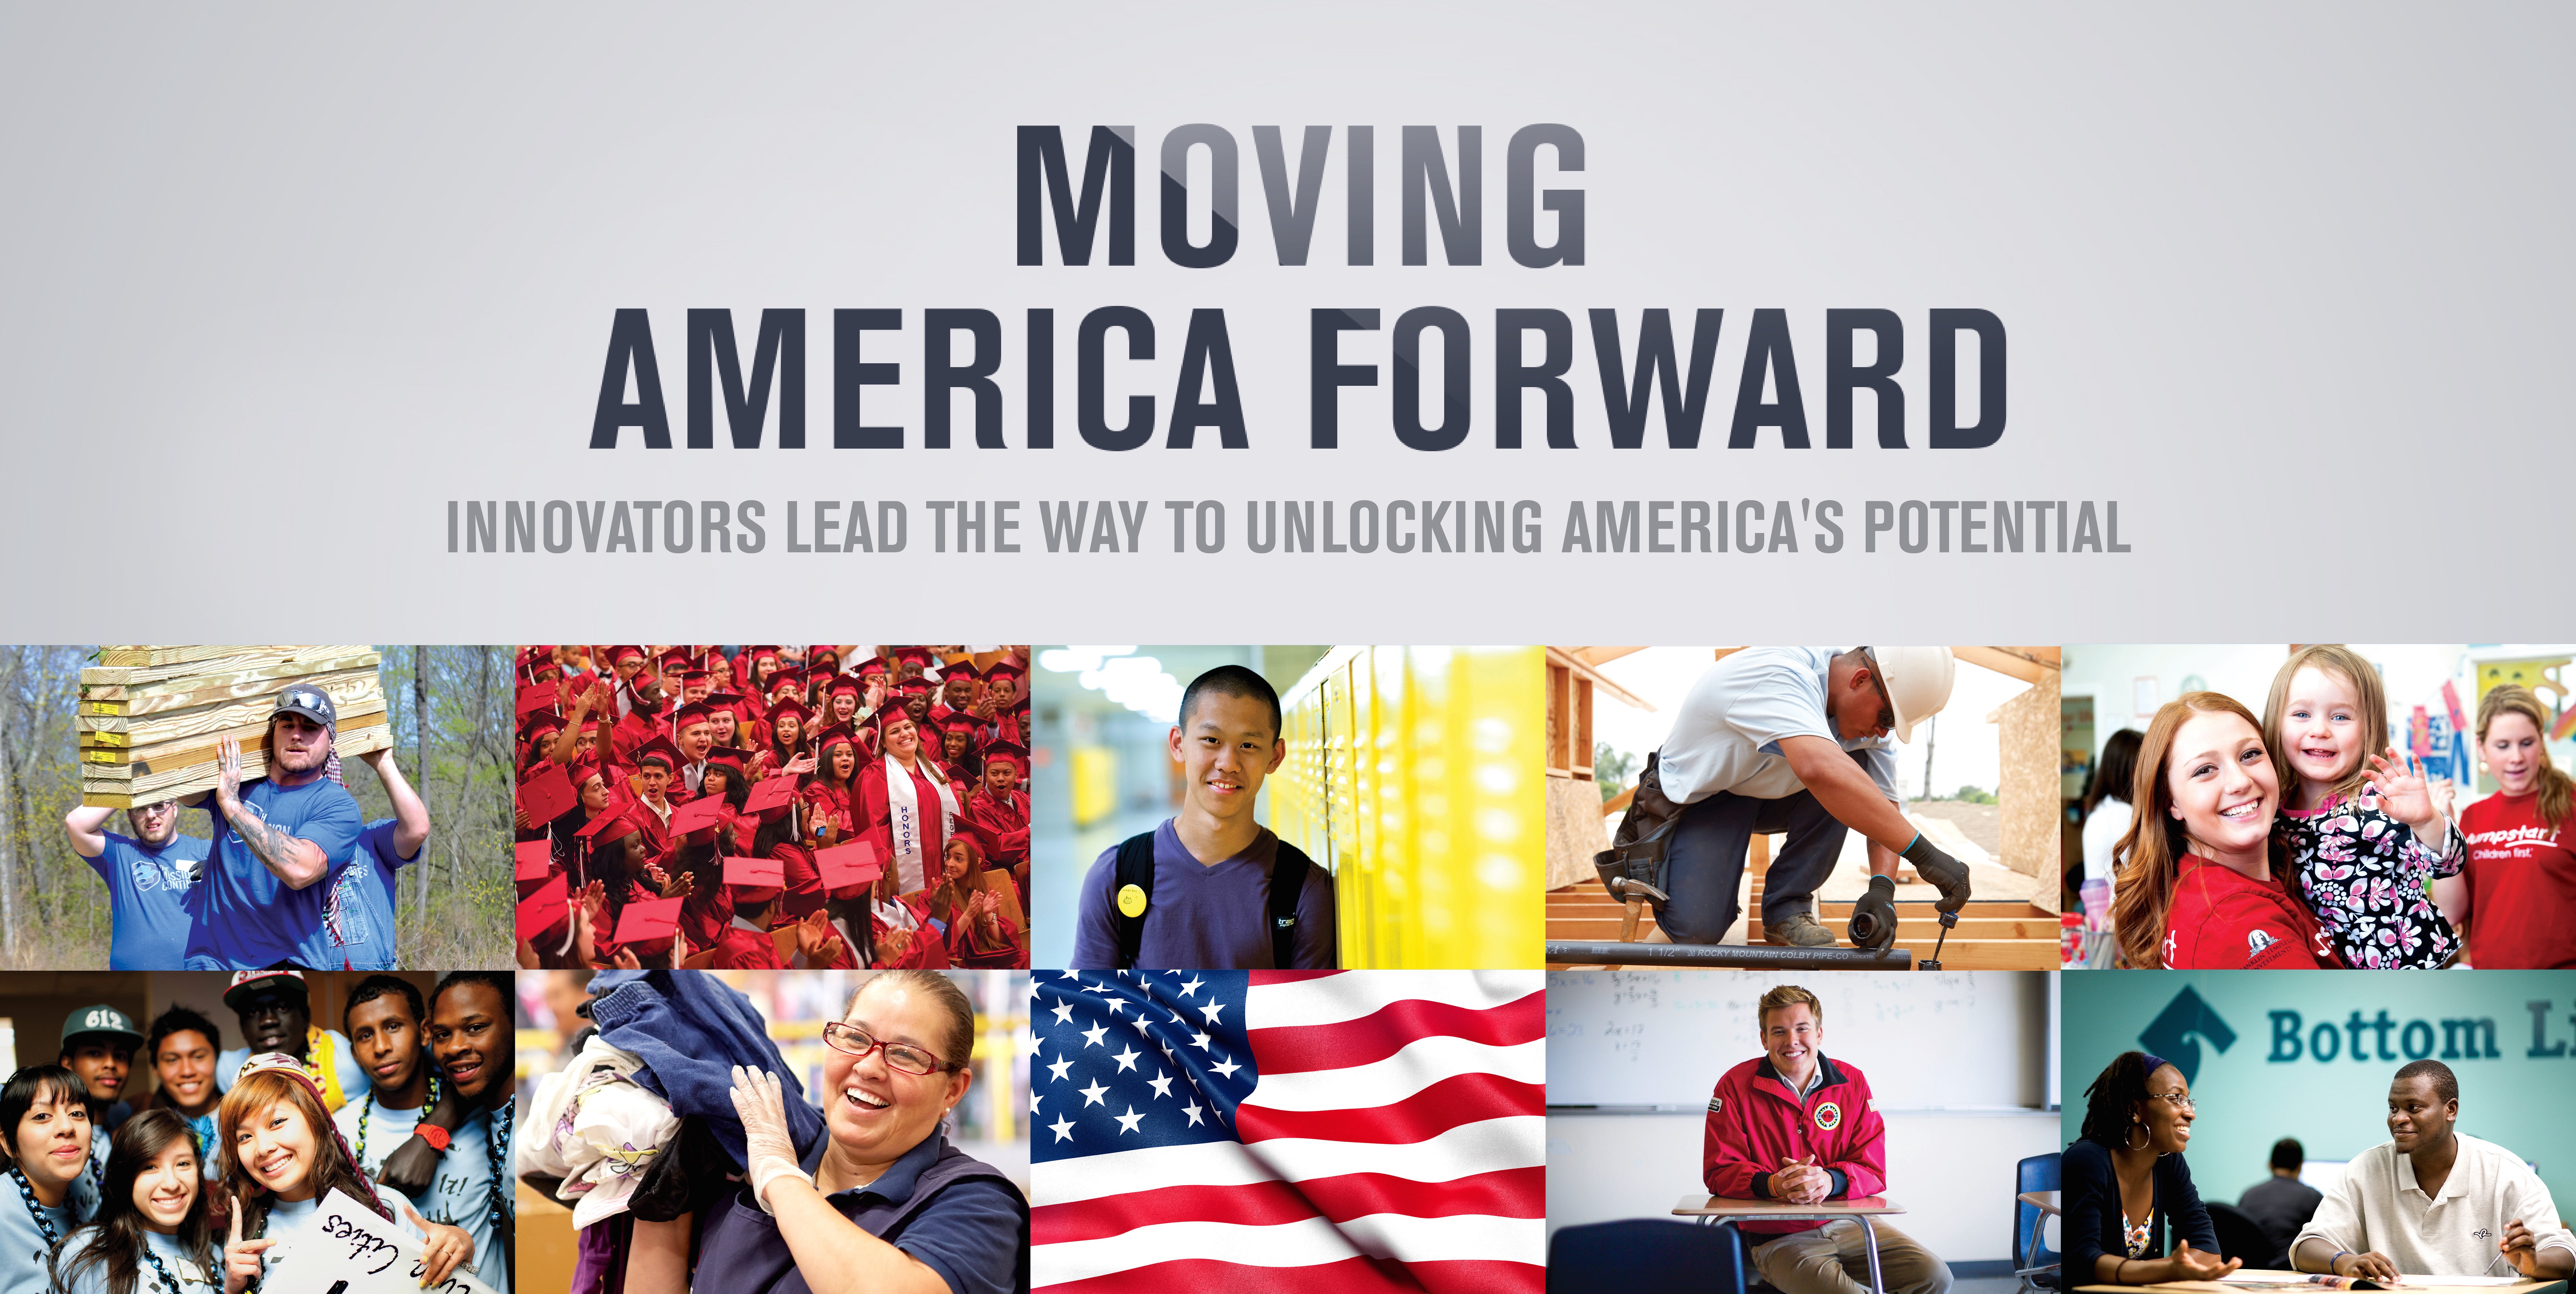 Moving America Forward "Second Chances" by Molly Baldwin, Founder and